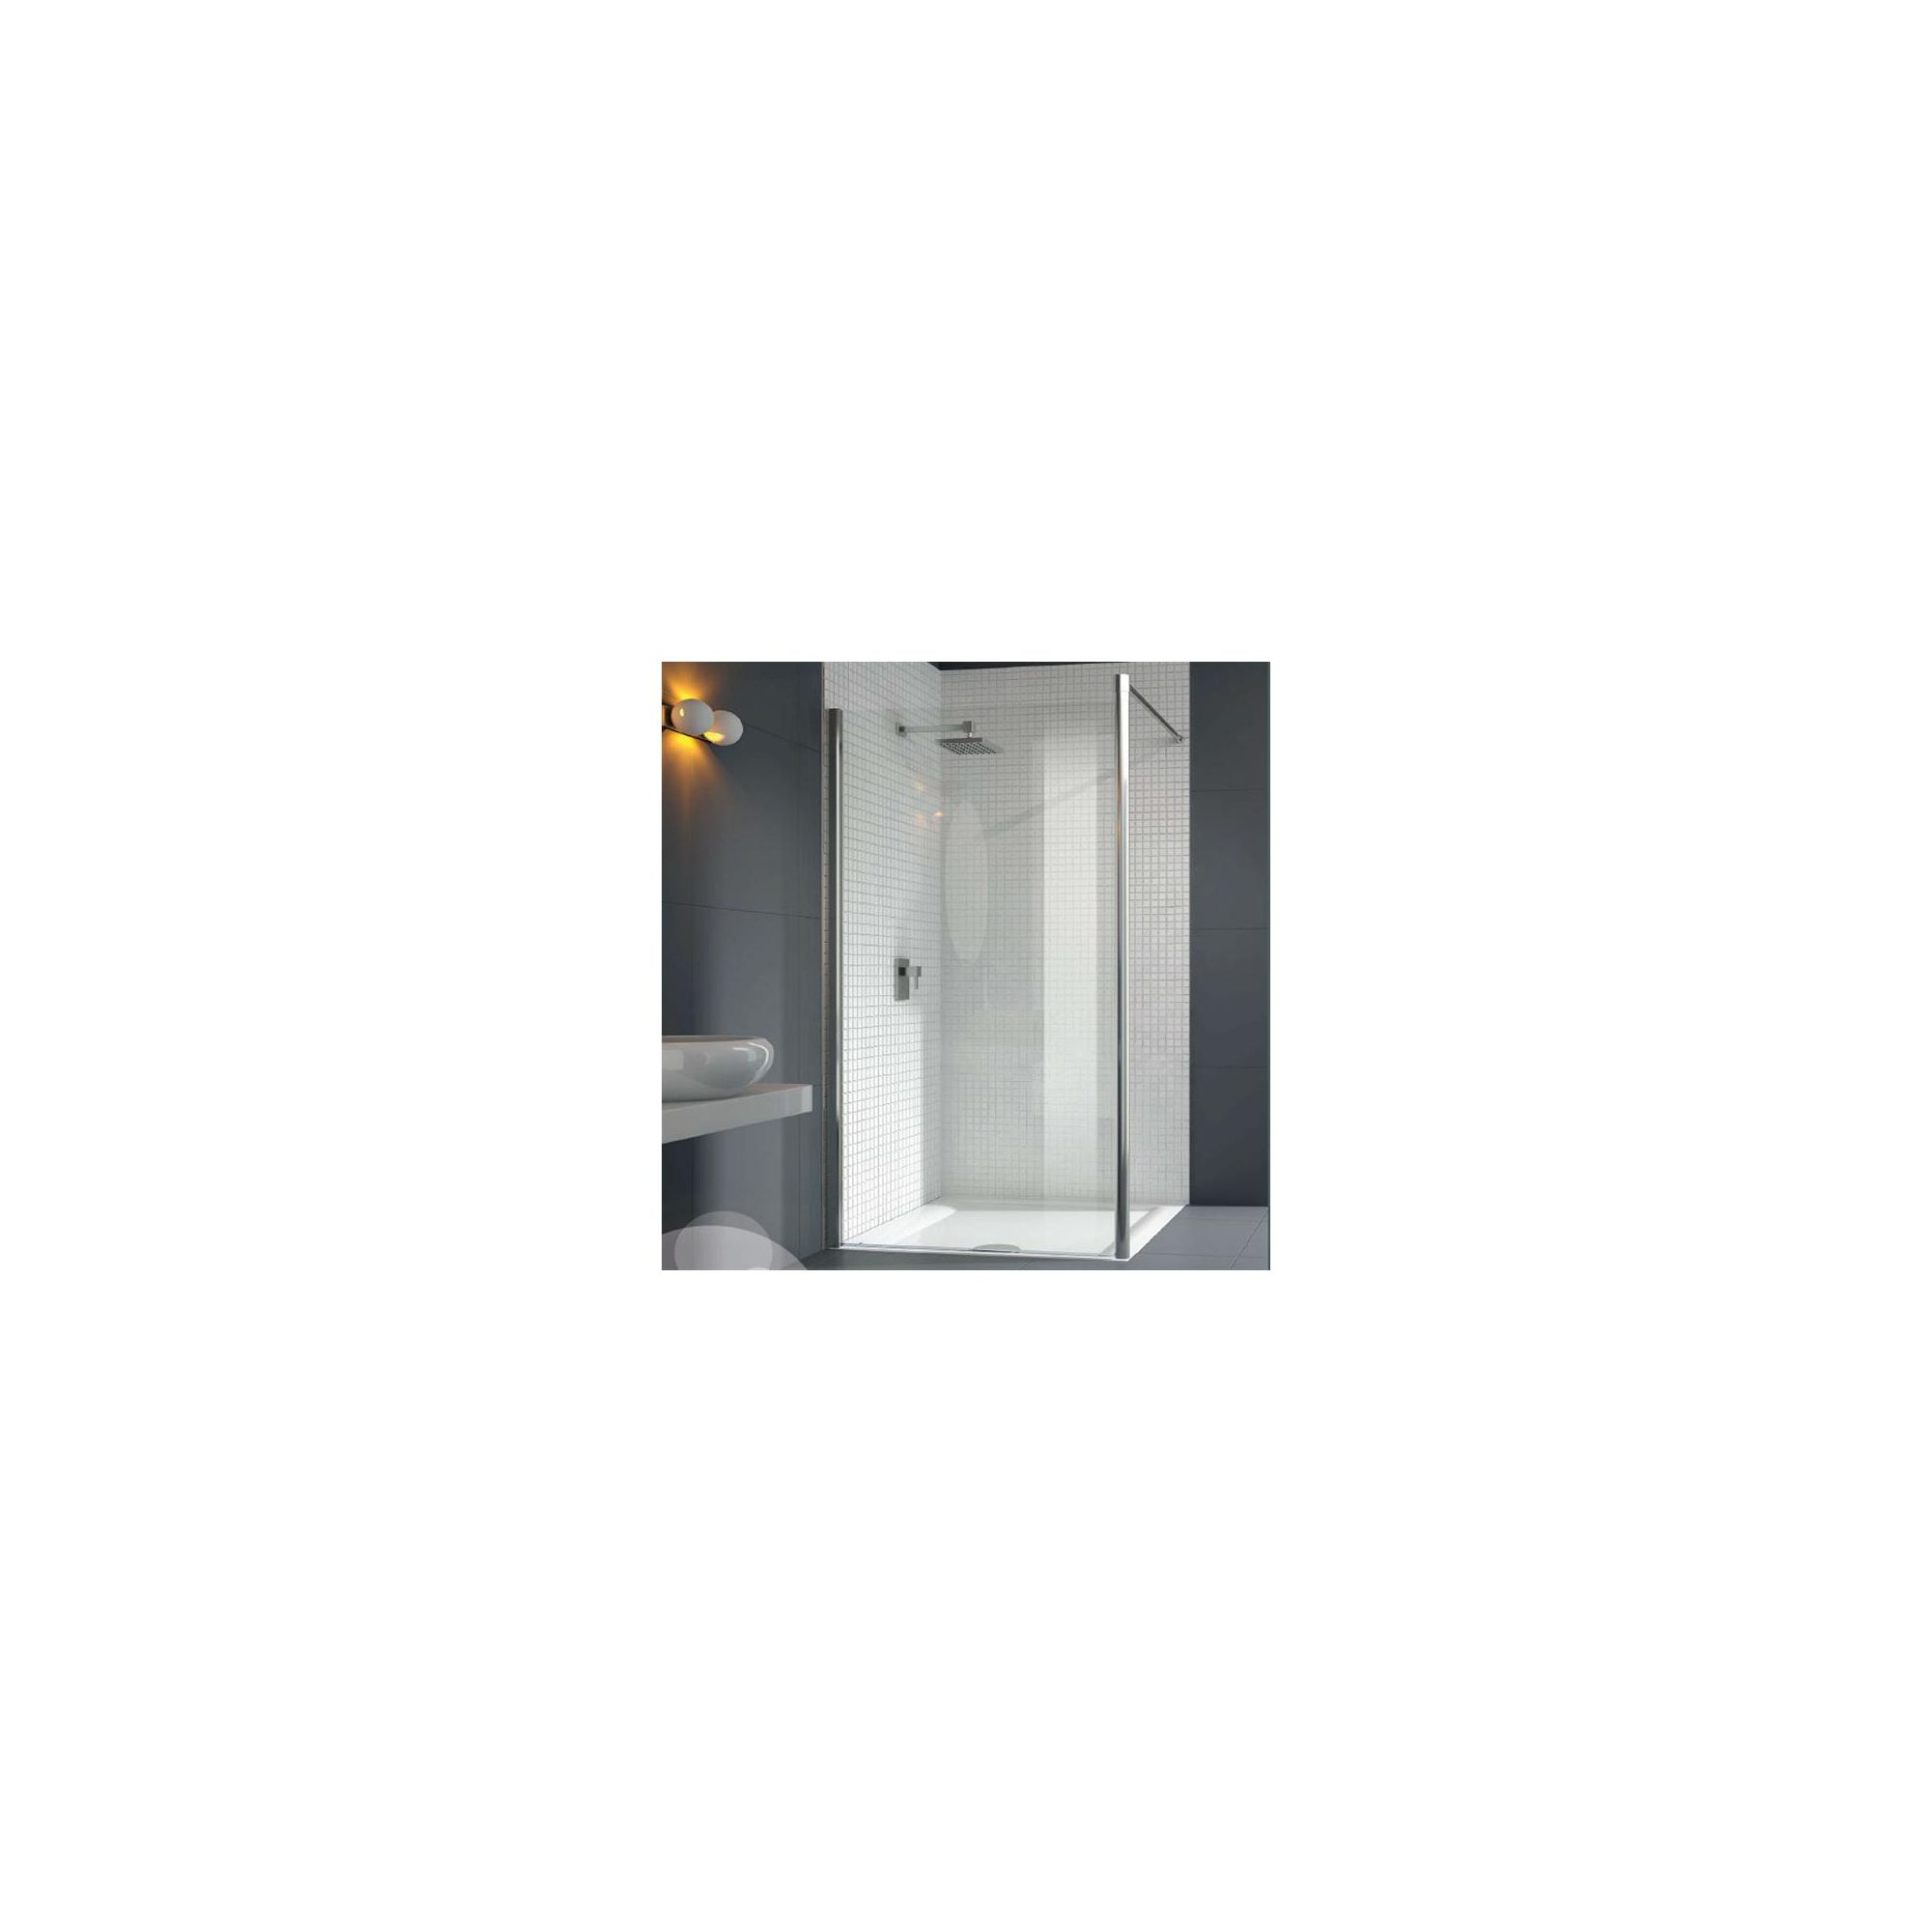 Merlyn Vivid Six Wet Room Shower Enclosure, 1200mm x 800mm, Horizontal Support Bar, Low Profile Tray, 6mm Glass at Tesco Direct